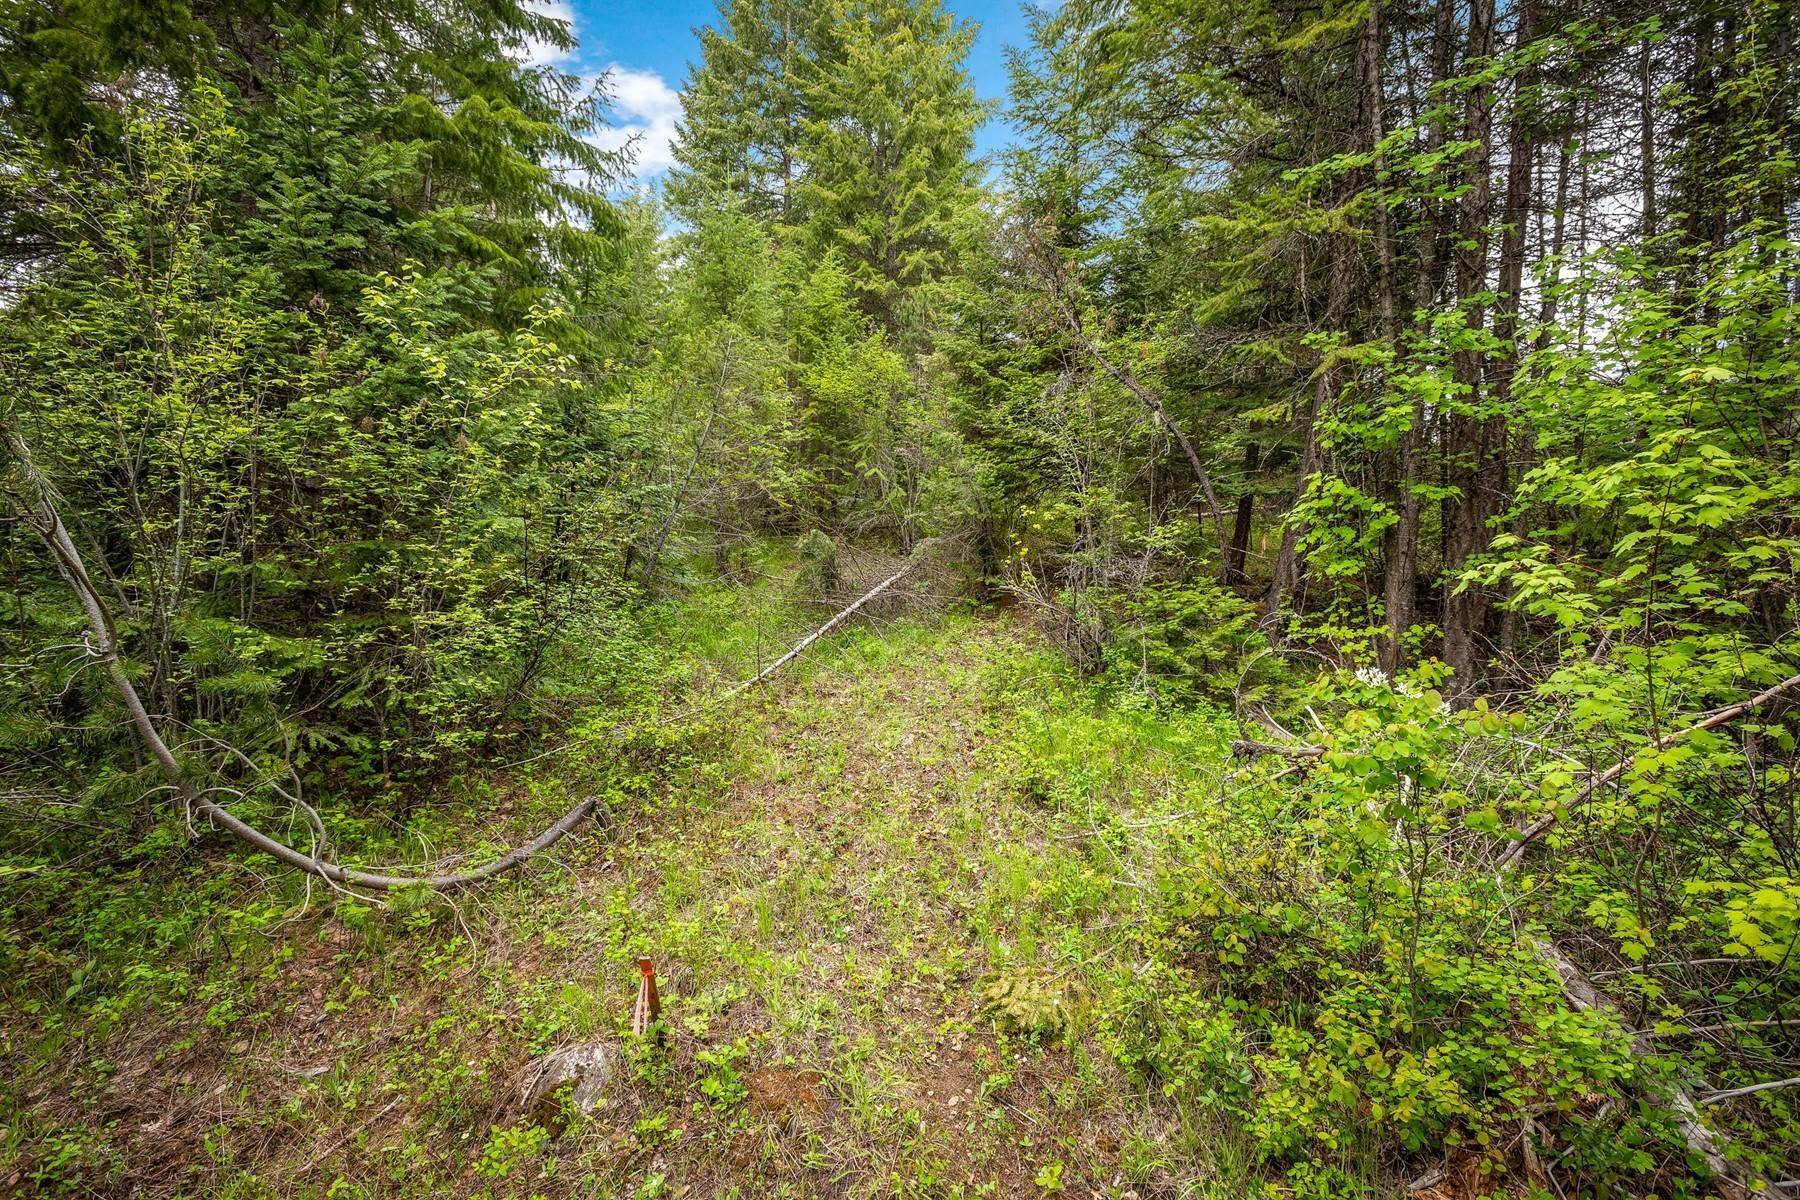 6. Land for Sale at Pend Oreille River Views 5 Acres Creek 1000 Morning Star Mtn Rd Priest River, Idaho 83856 United States